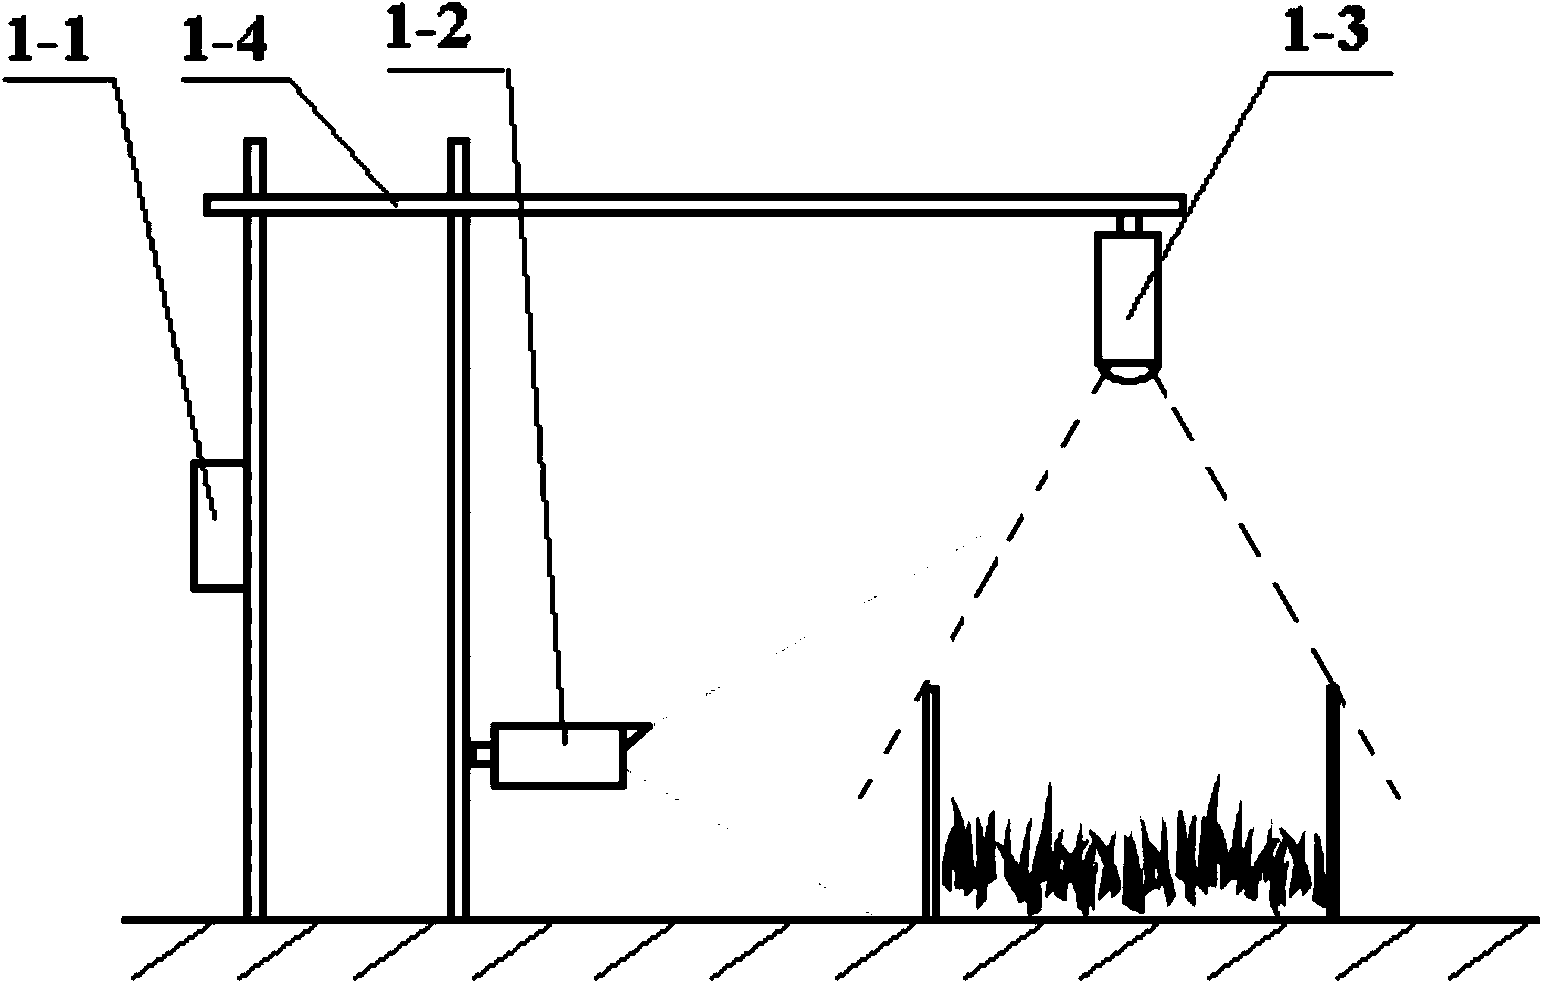 Microclimate monitoring system and method for monitoring native grass based on system